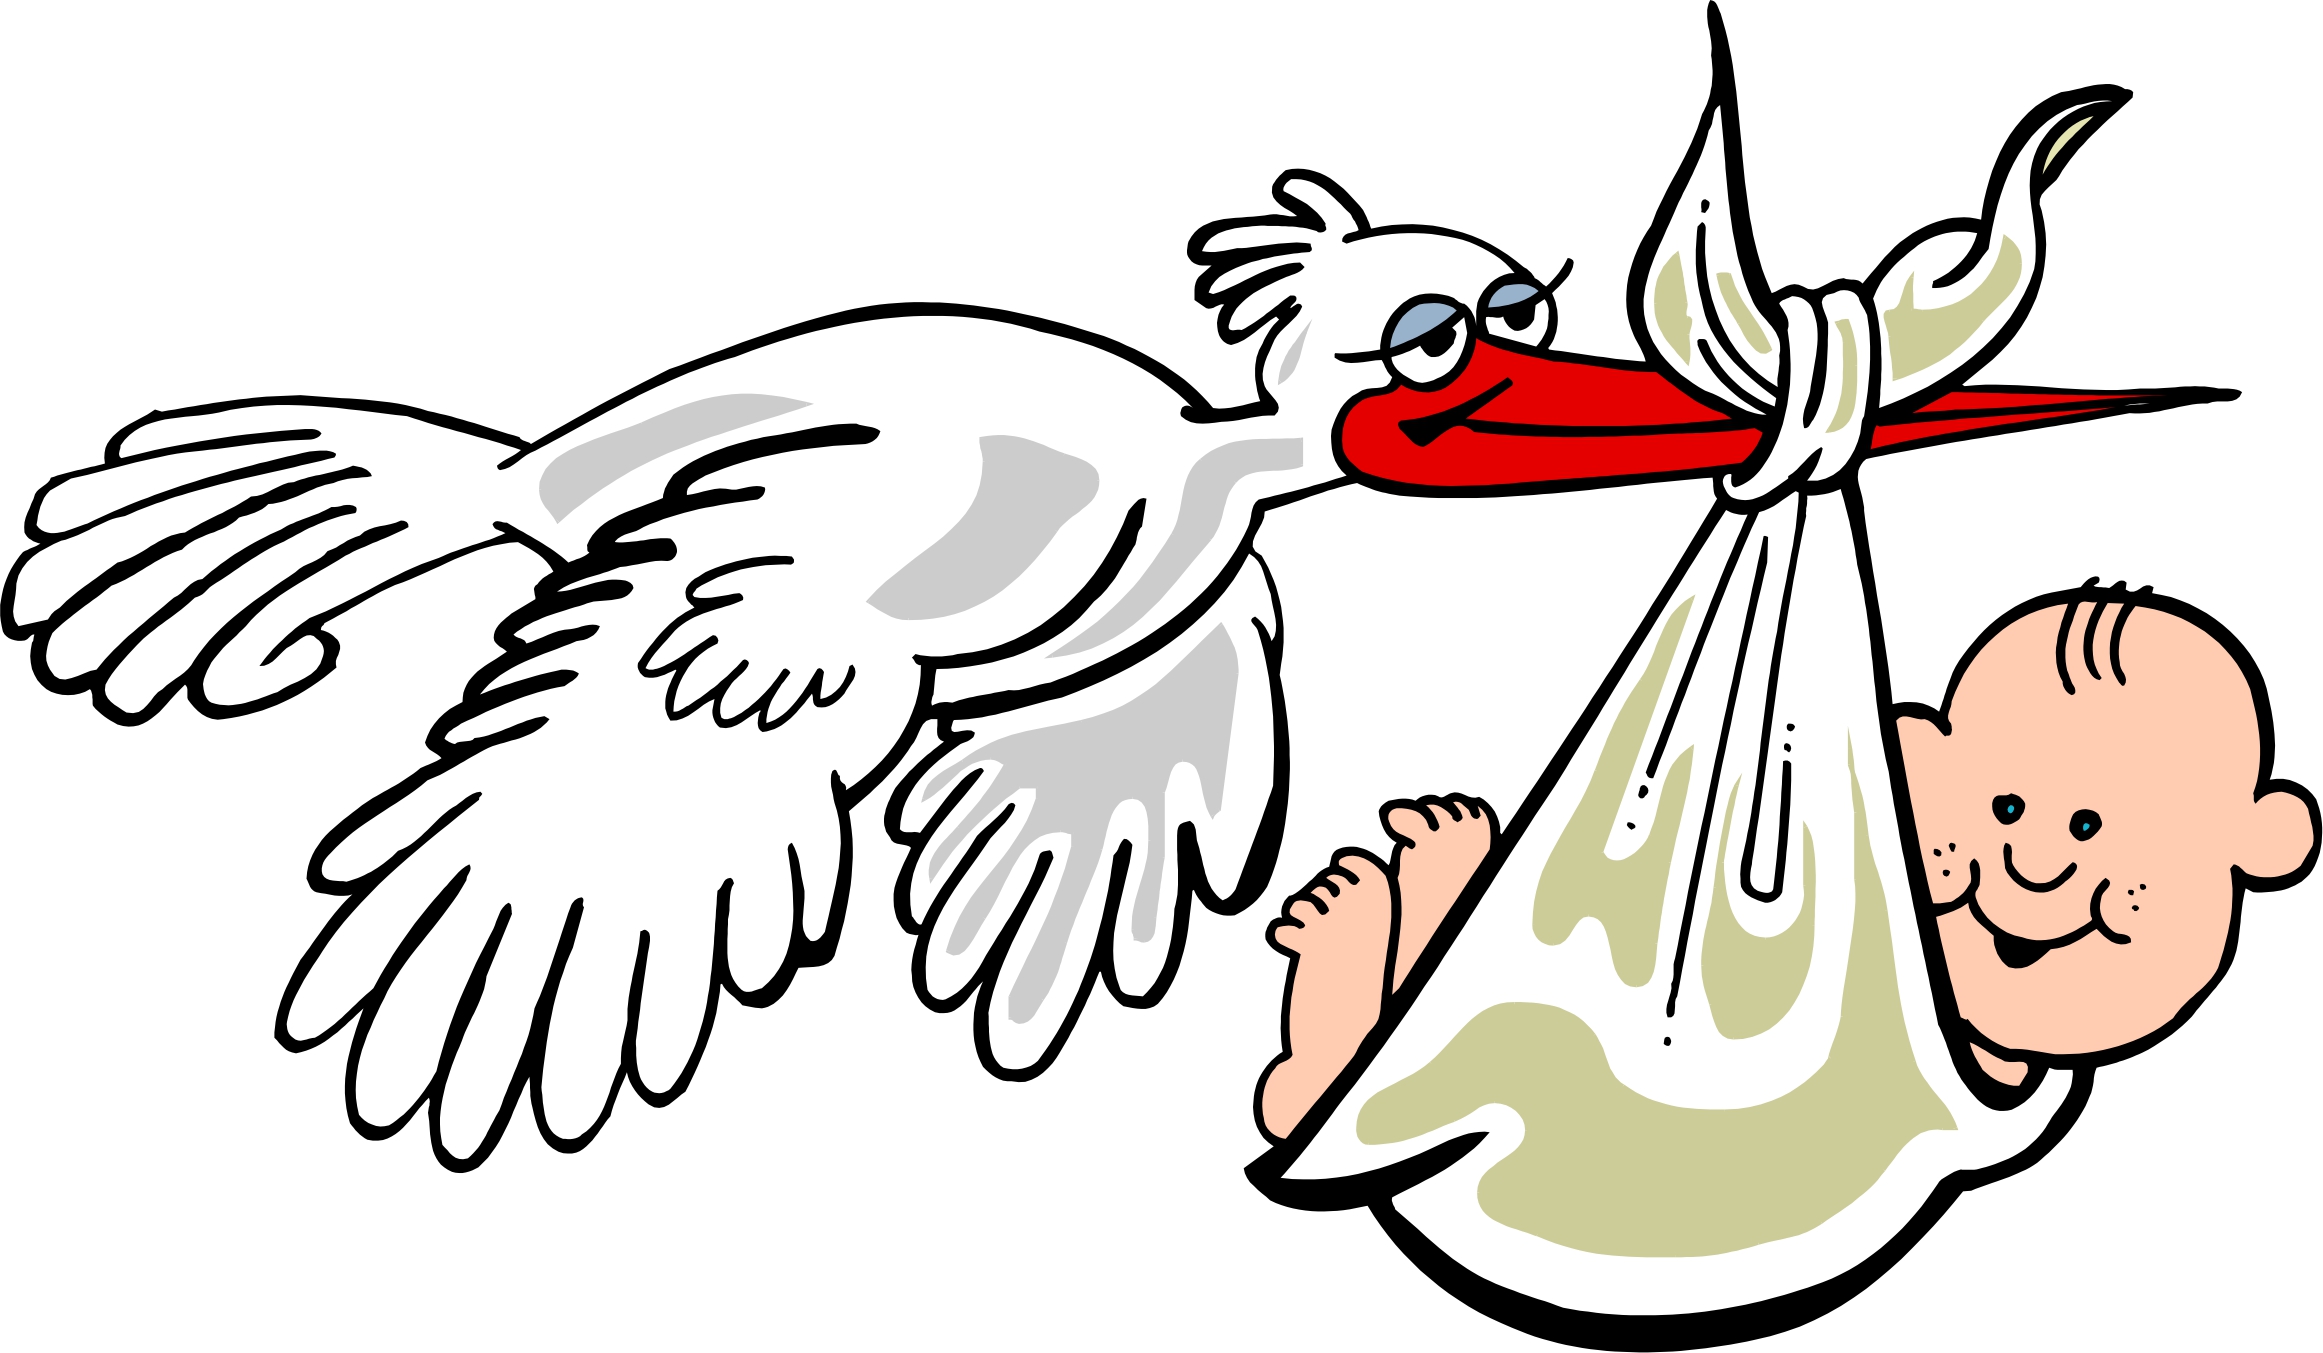 Baby Stork Cartoon - Clipart library - Clipart library